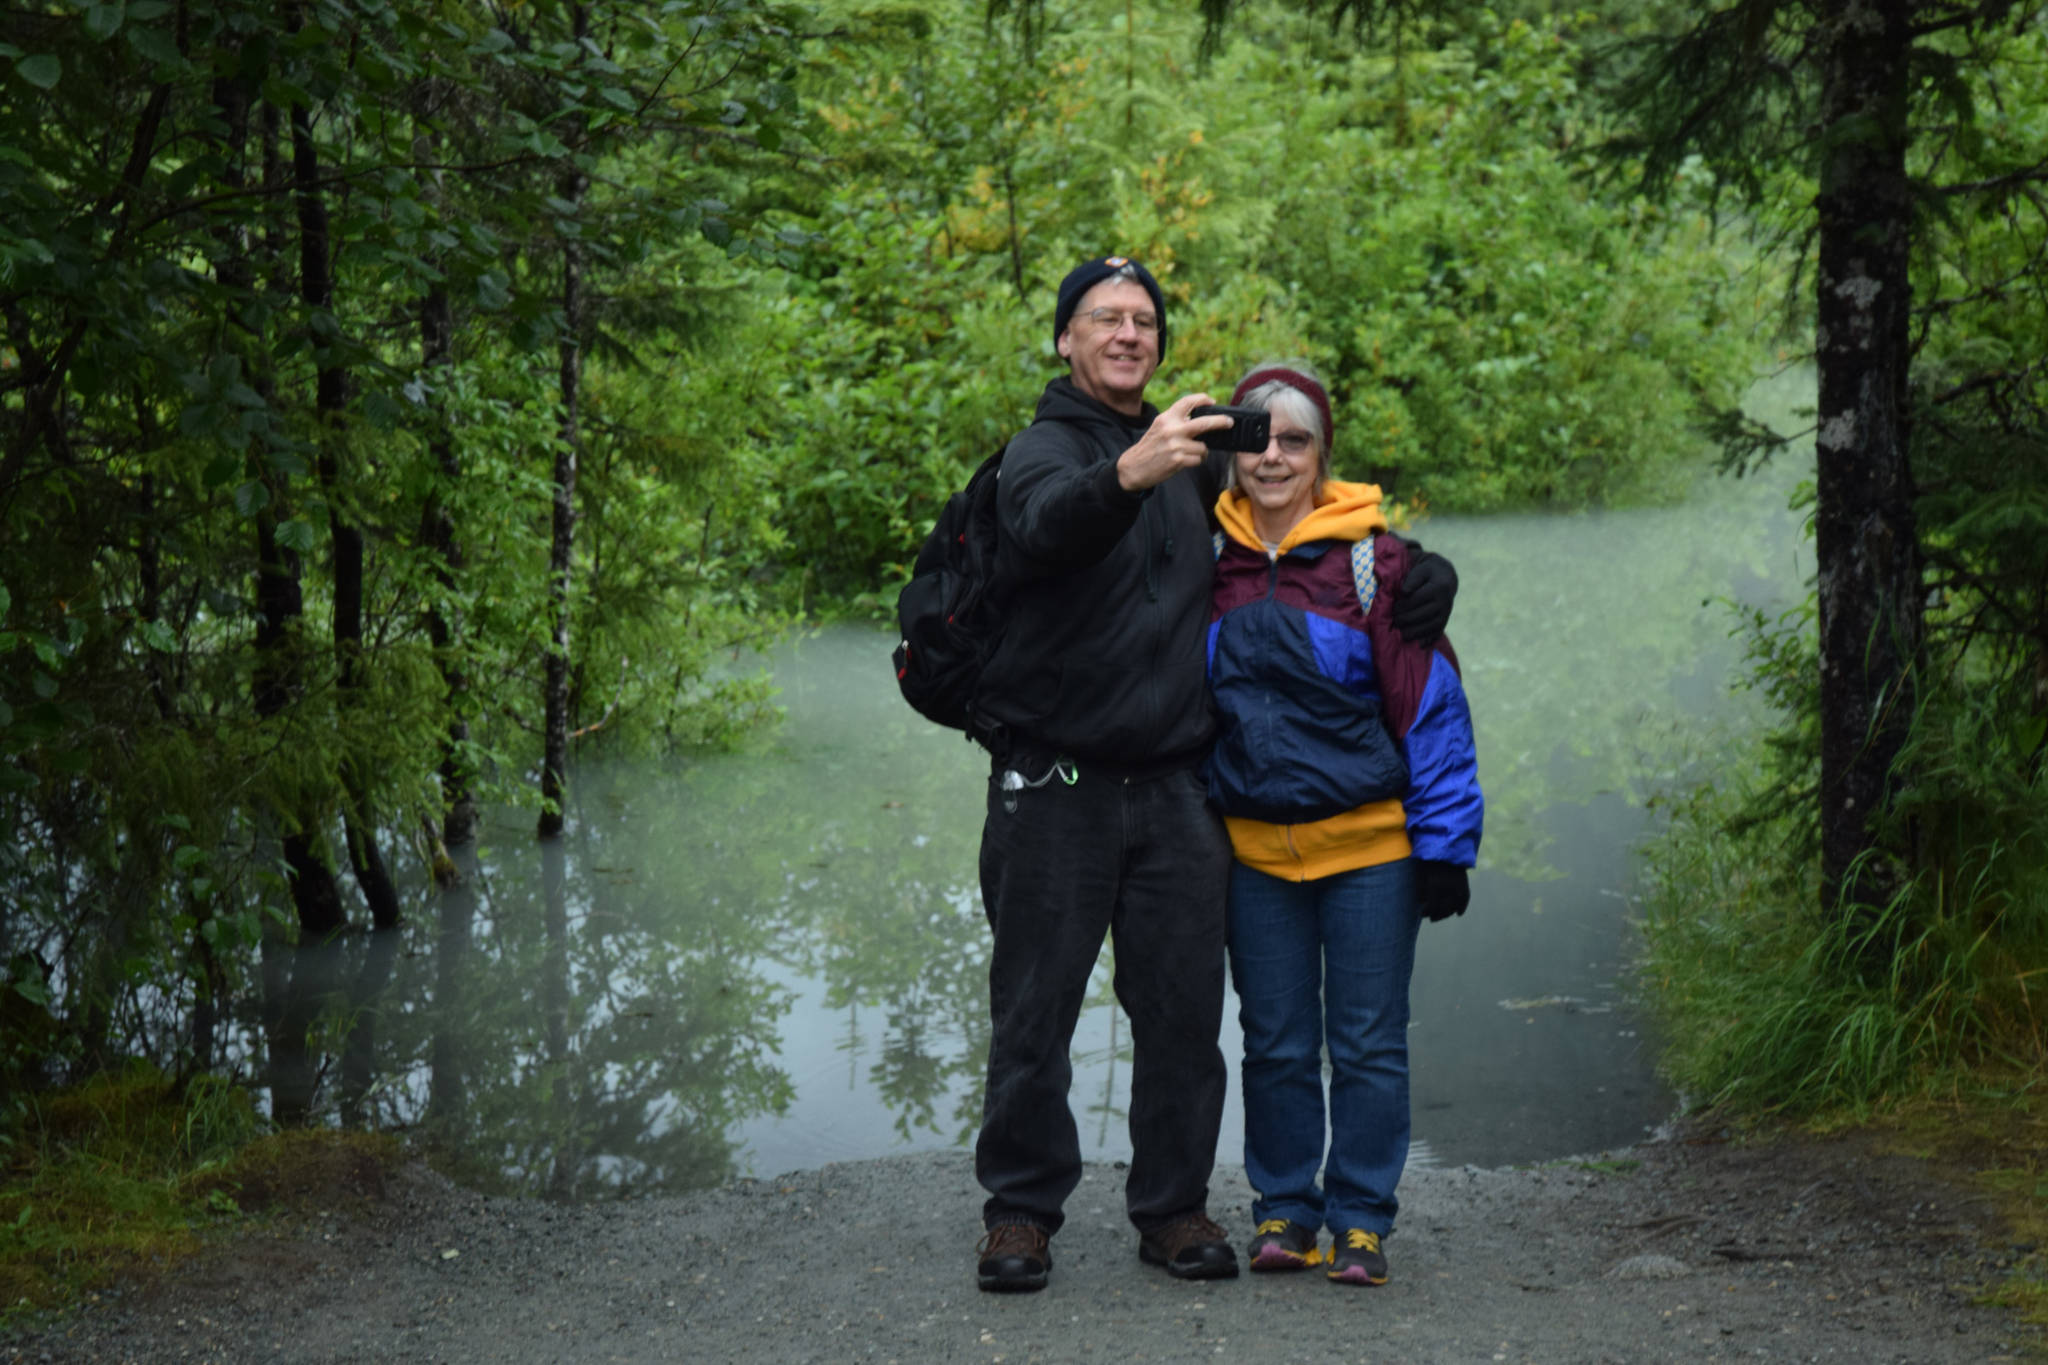 Steve and JoAnne Zemanek, from Dayton, Ohio, pose for selfie at a flooded impass on Nugget Falls Trail. Flooding on the Mendenhall River and lake is expected to peak today. (Kevin Gullufsen | Juneau Empire)